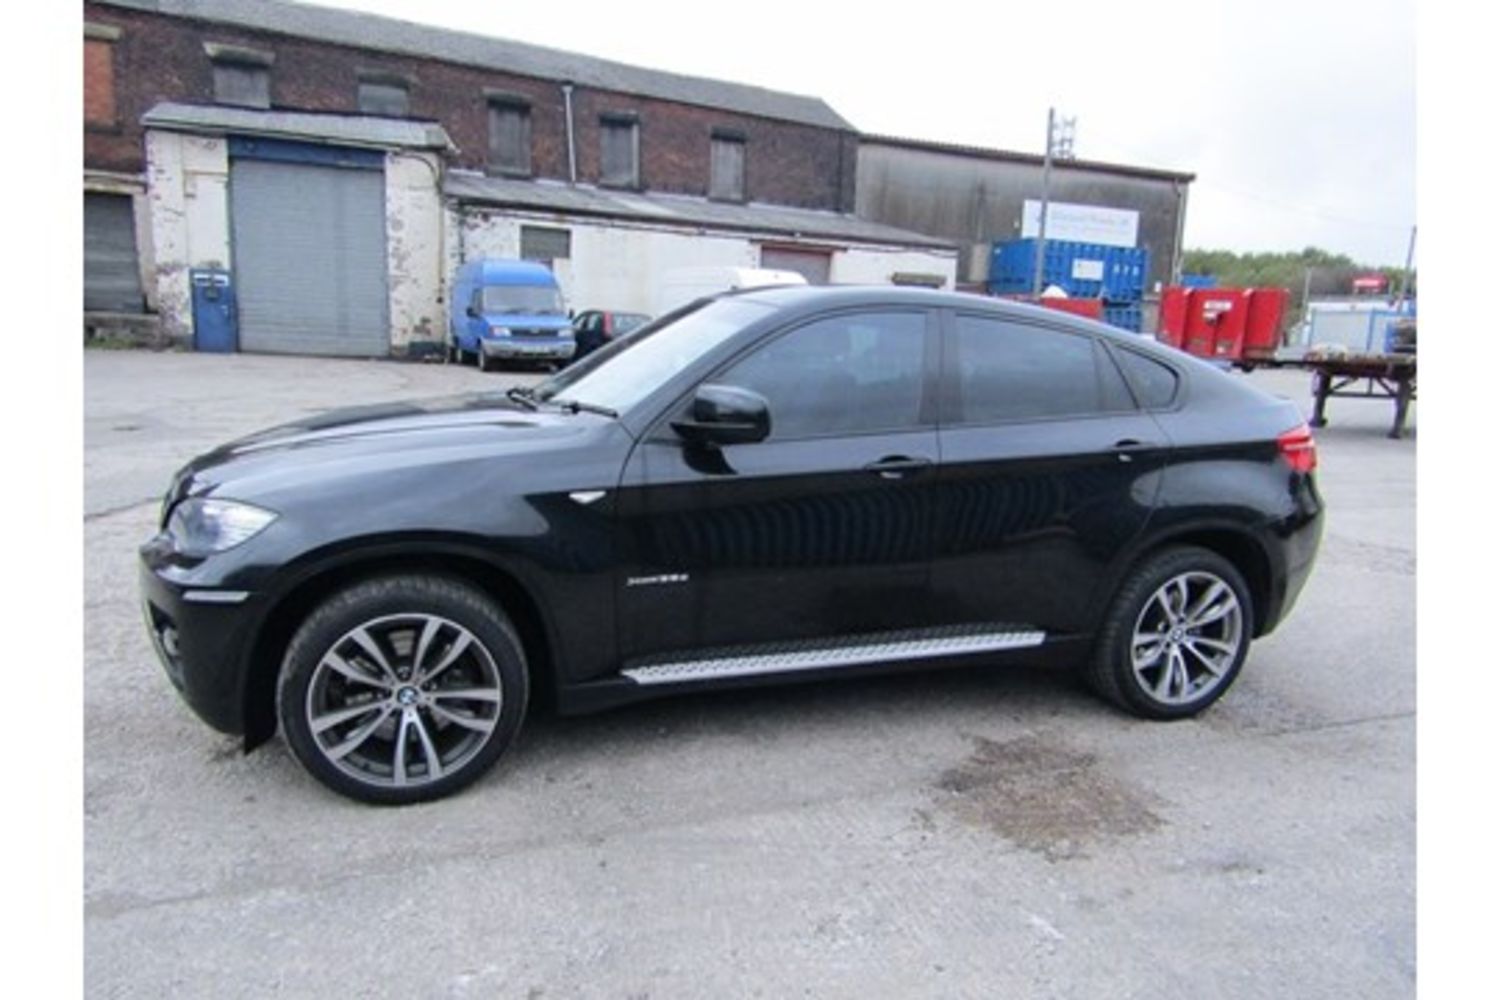 Vehicle Auction Of BMW X6 35D & More